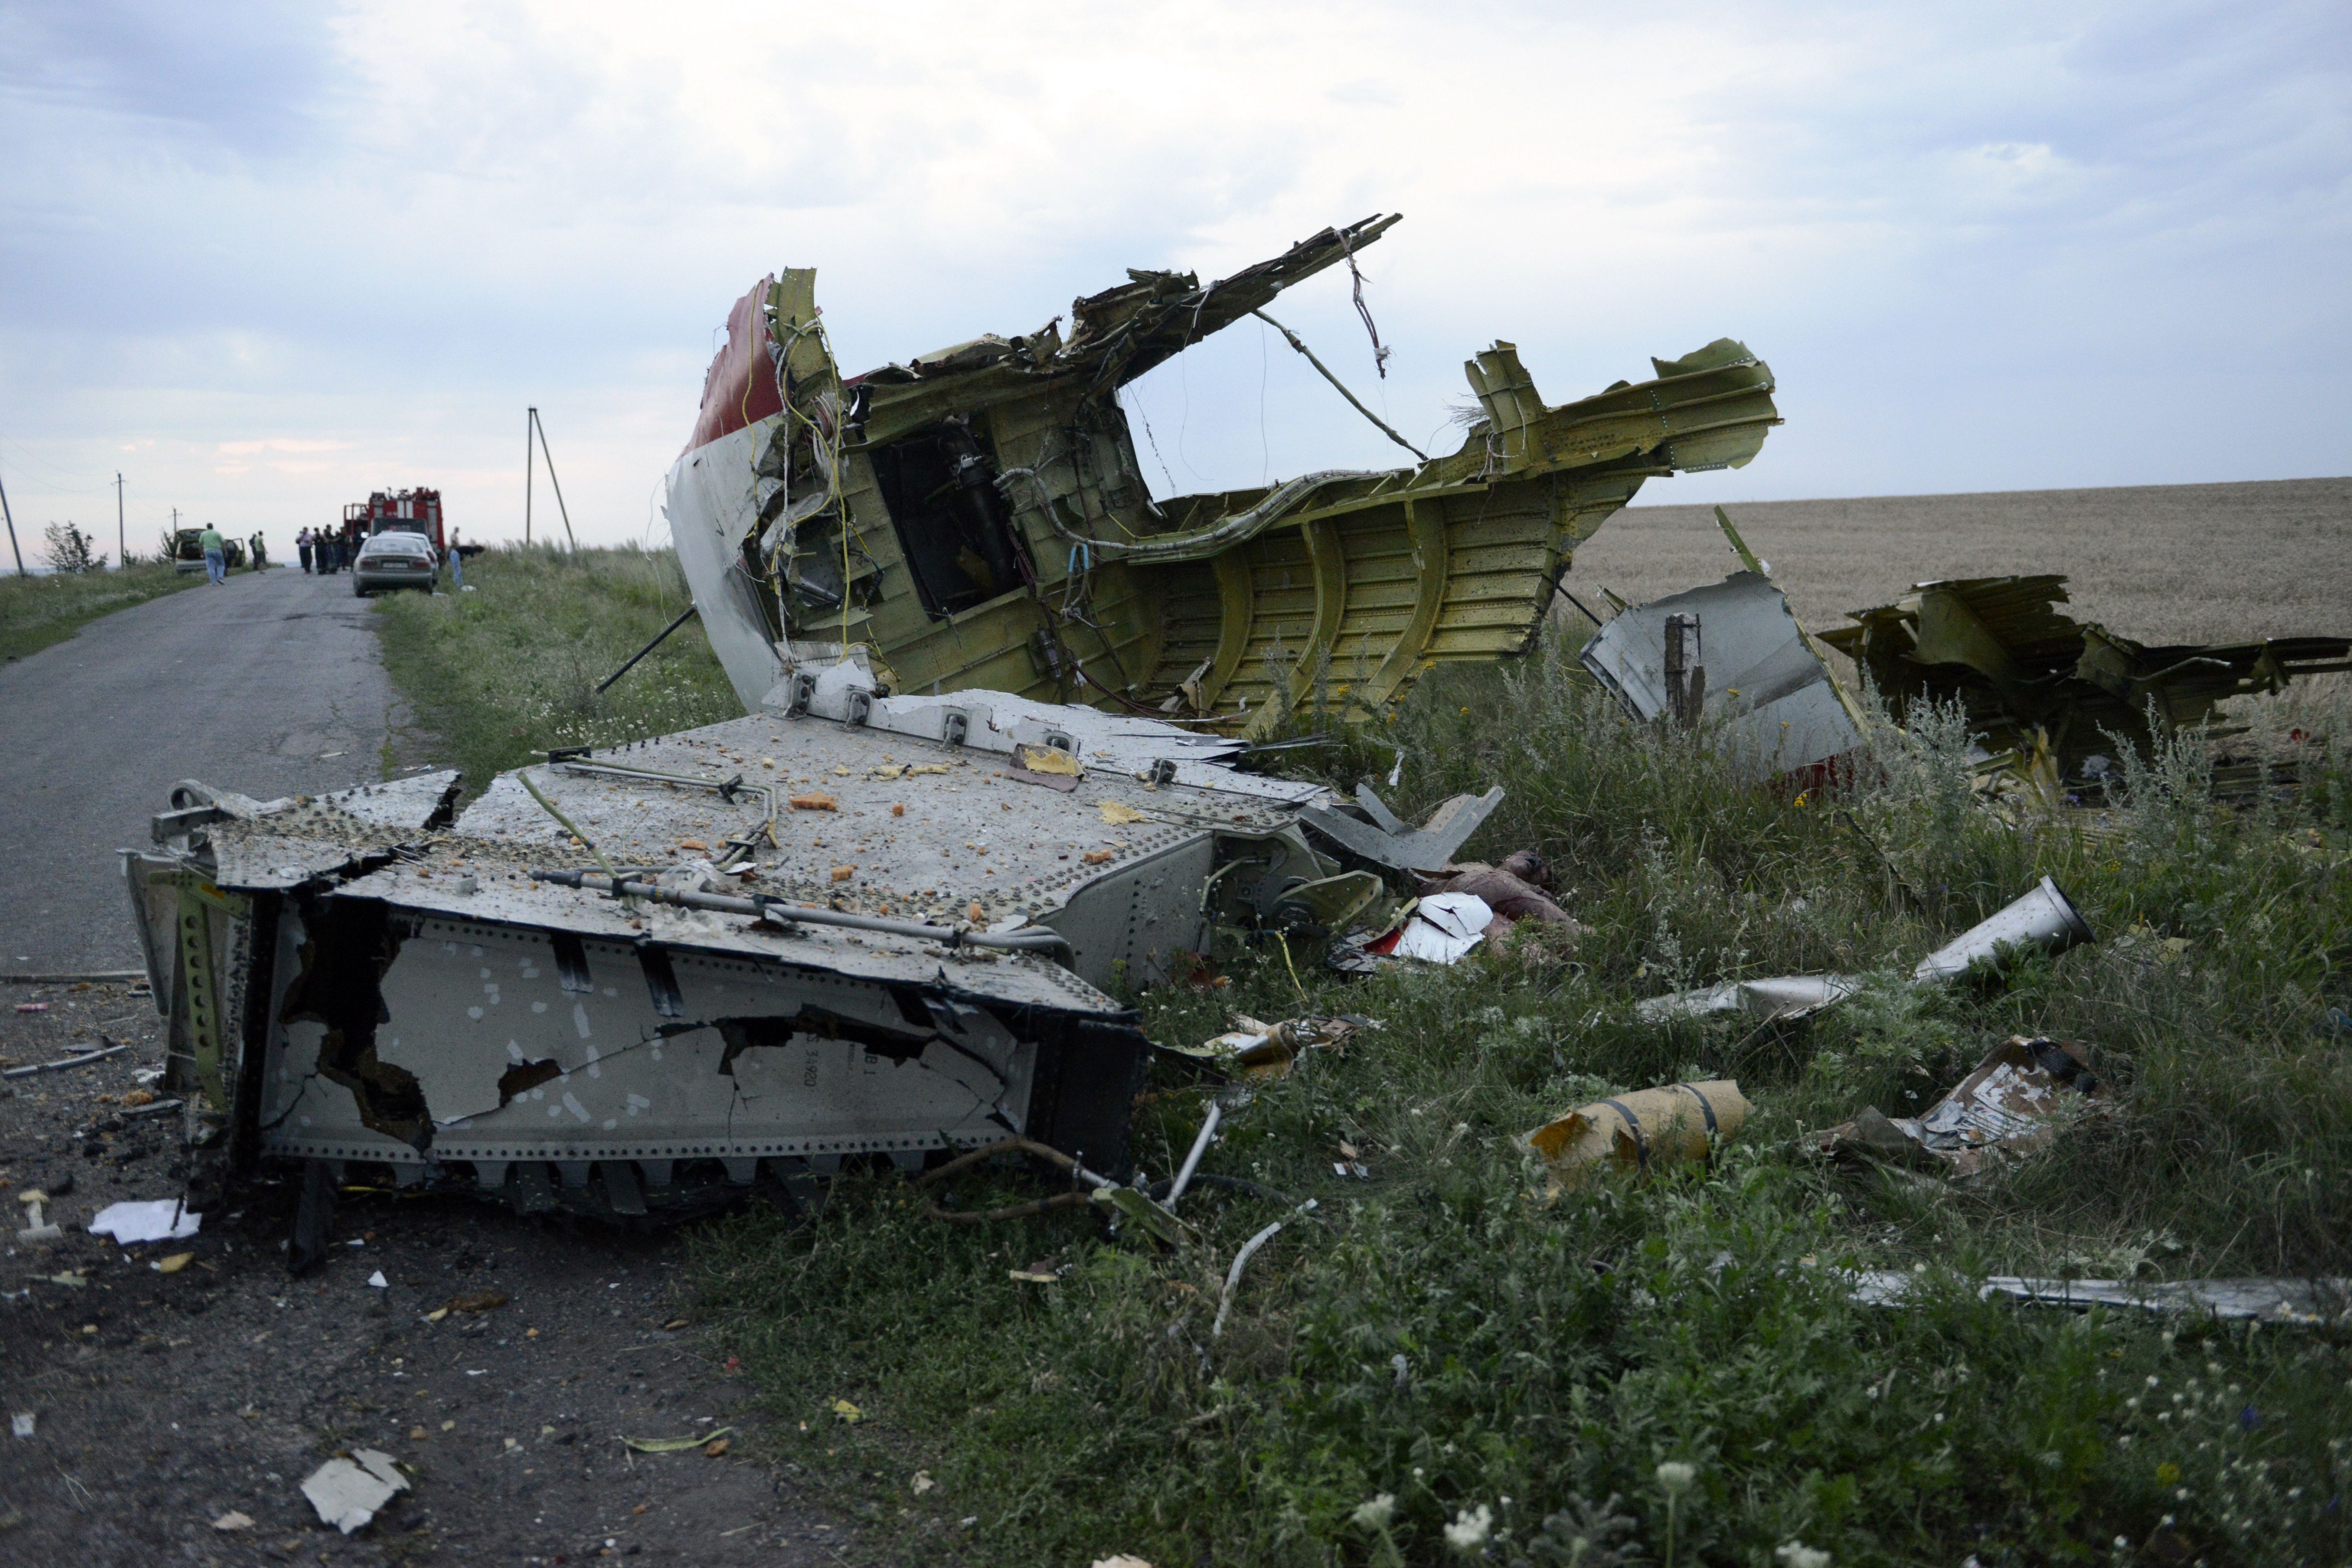 A picture taken on July 17, 2014, shows the wreckages of the Malaysian airliner carrying 298 people from Amsterdam to Kuala Lumpur after it crashed, near the town of Shaktarsk, in rebel-held east Ukraine. (Alexander Khudoteply—AFP/Getty Images)